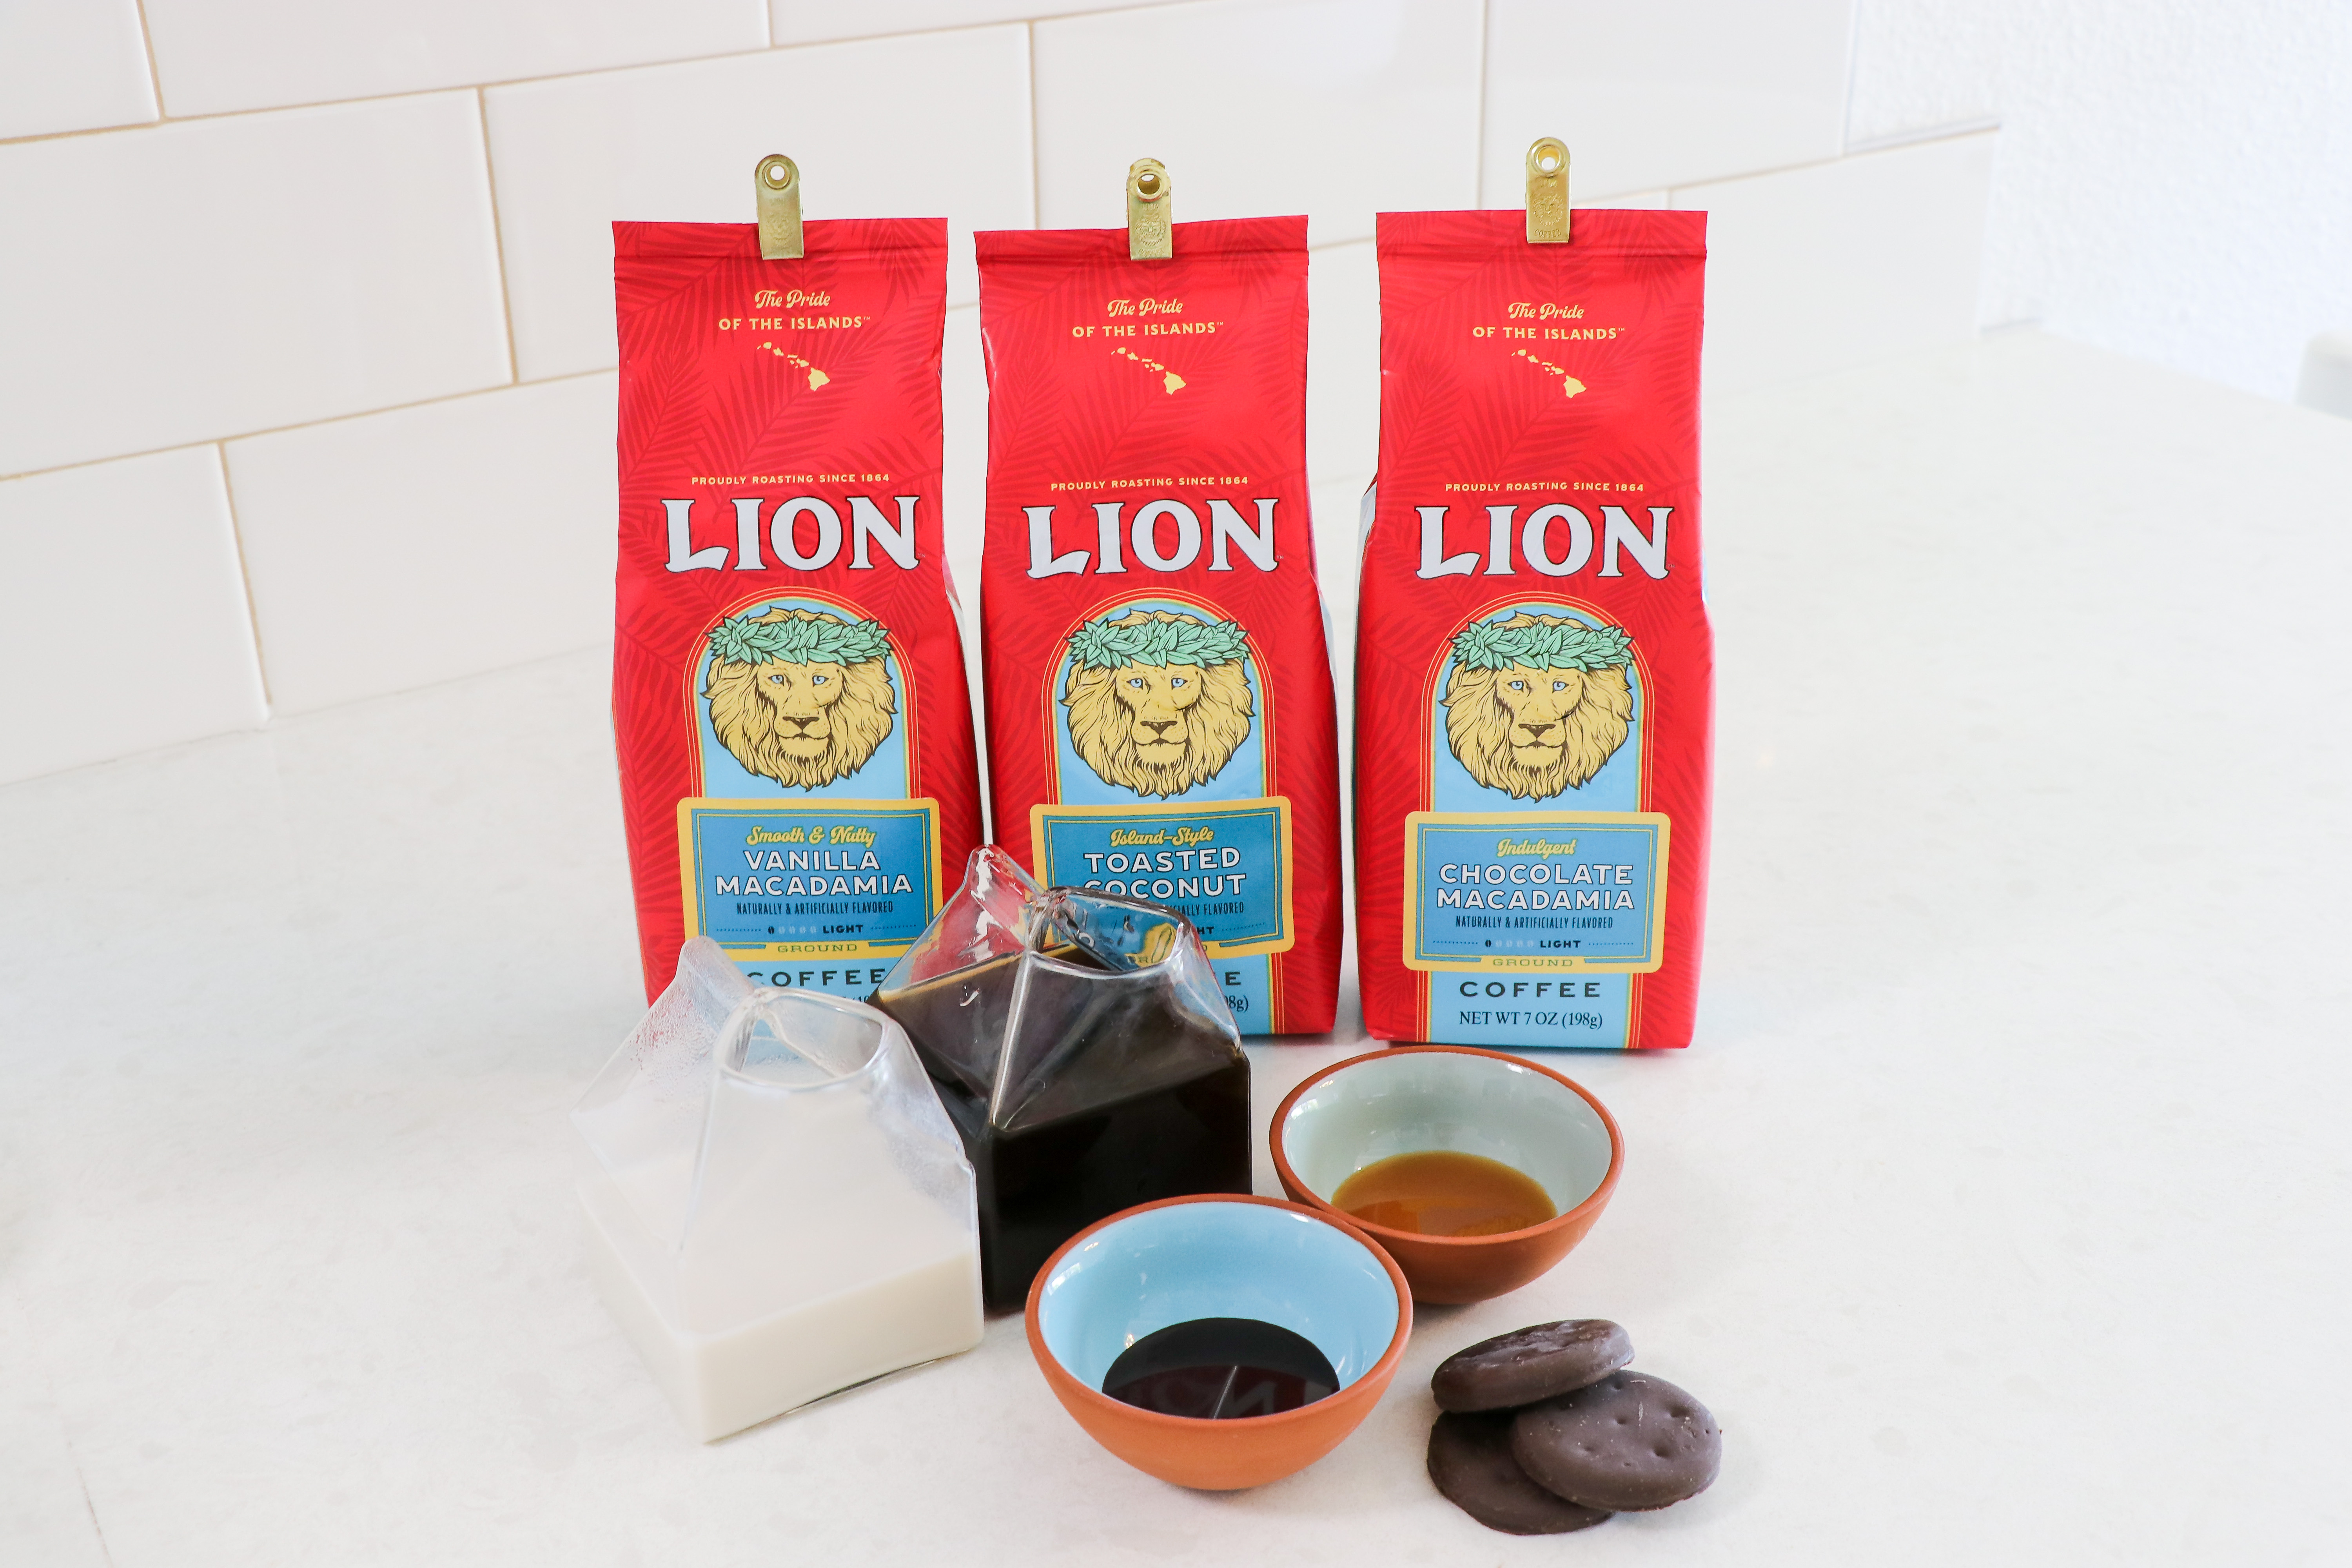 Lion Flavored Coffee